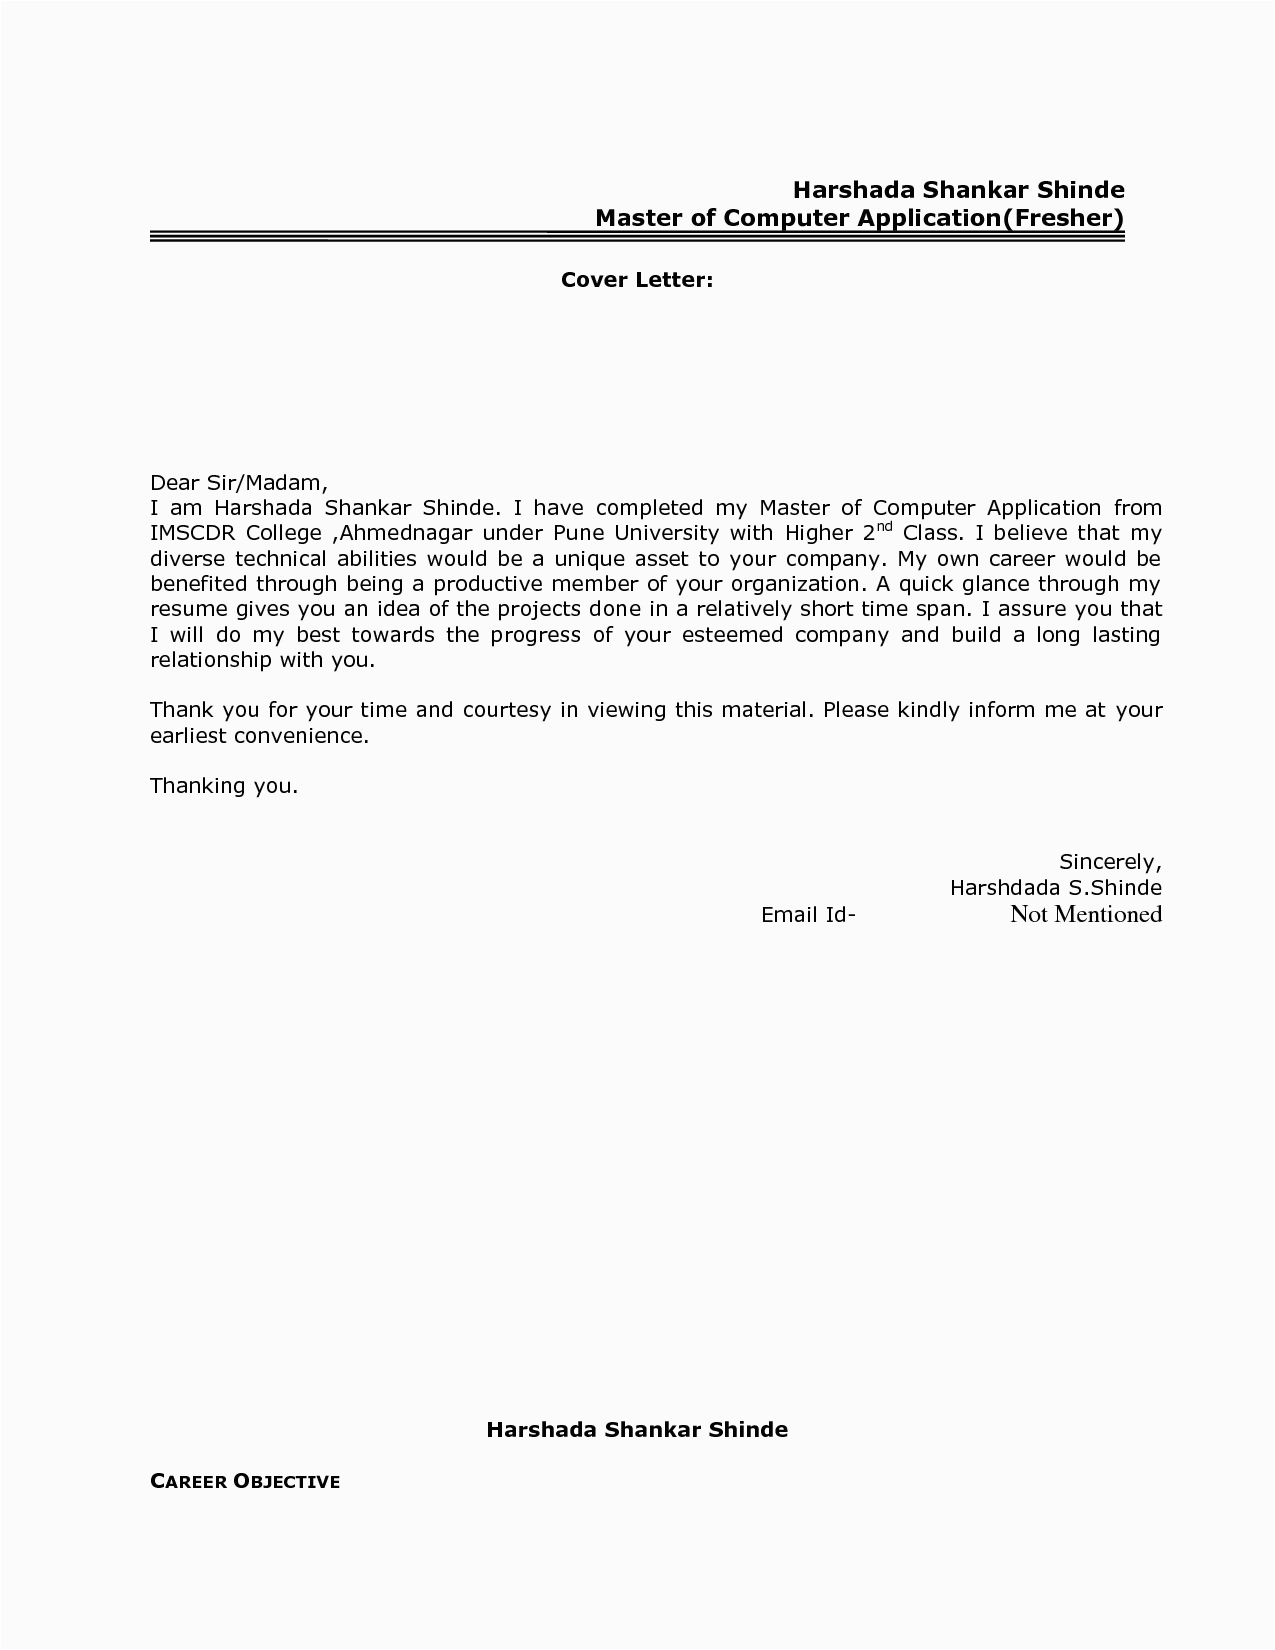 Sample Email Cover Letter with Resume attached for Freshers Best Resume Cover Letter format for Freshers Govt Jobcover